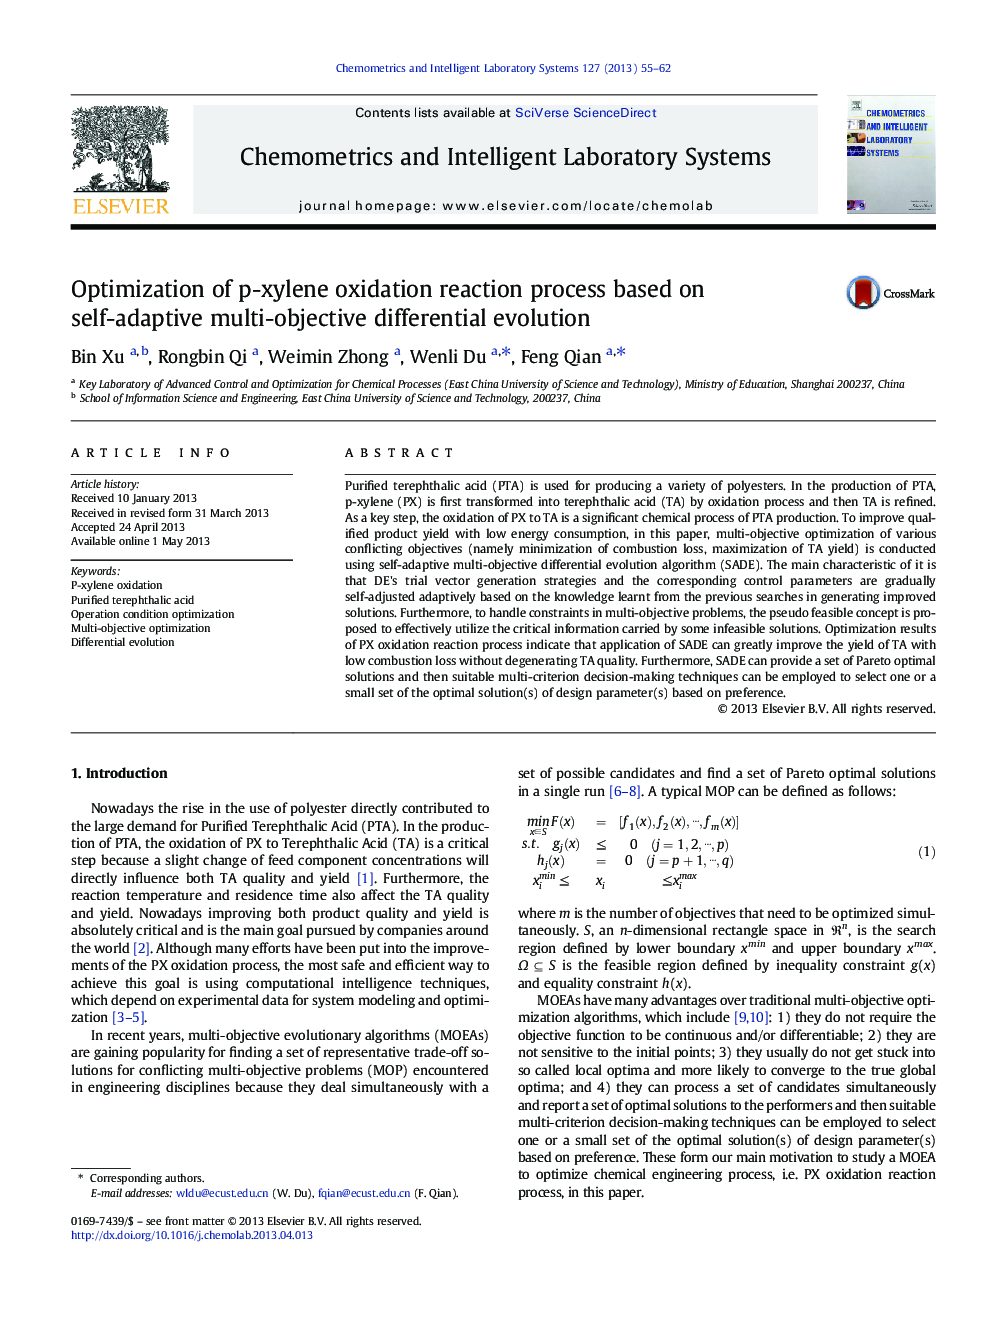 Optimization of p-xylene oxidation reaction process based on self-adaptive multi-objective differential evolution